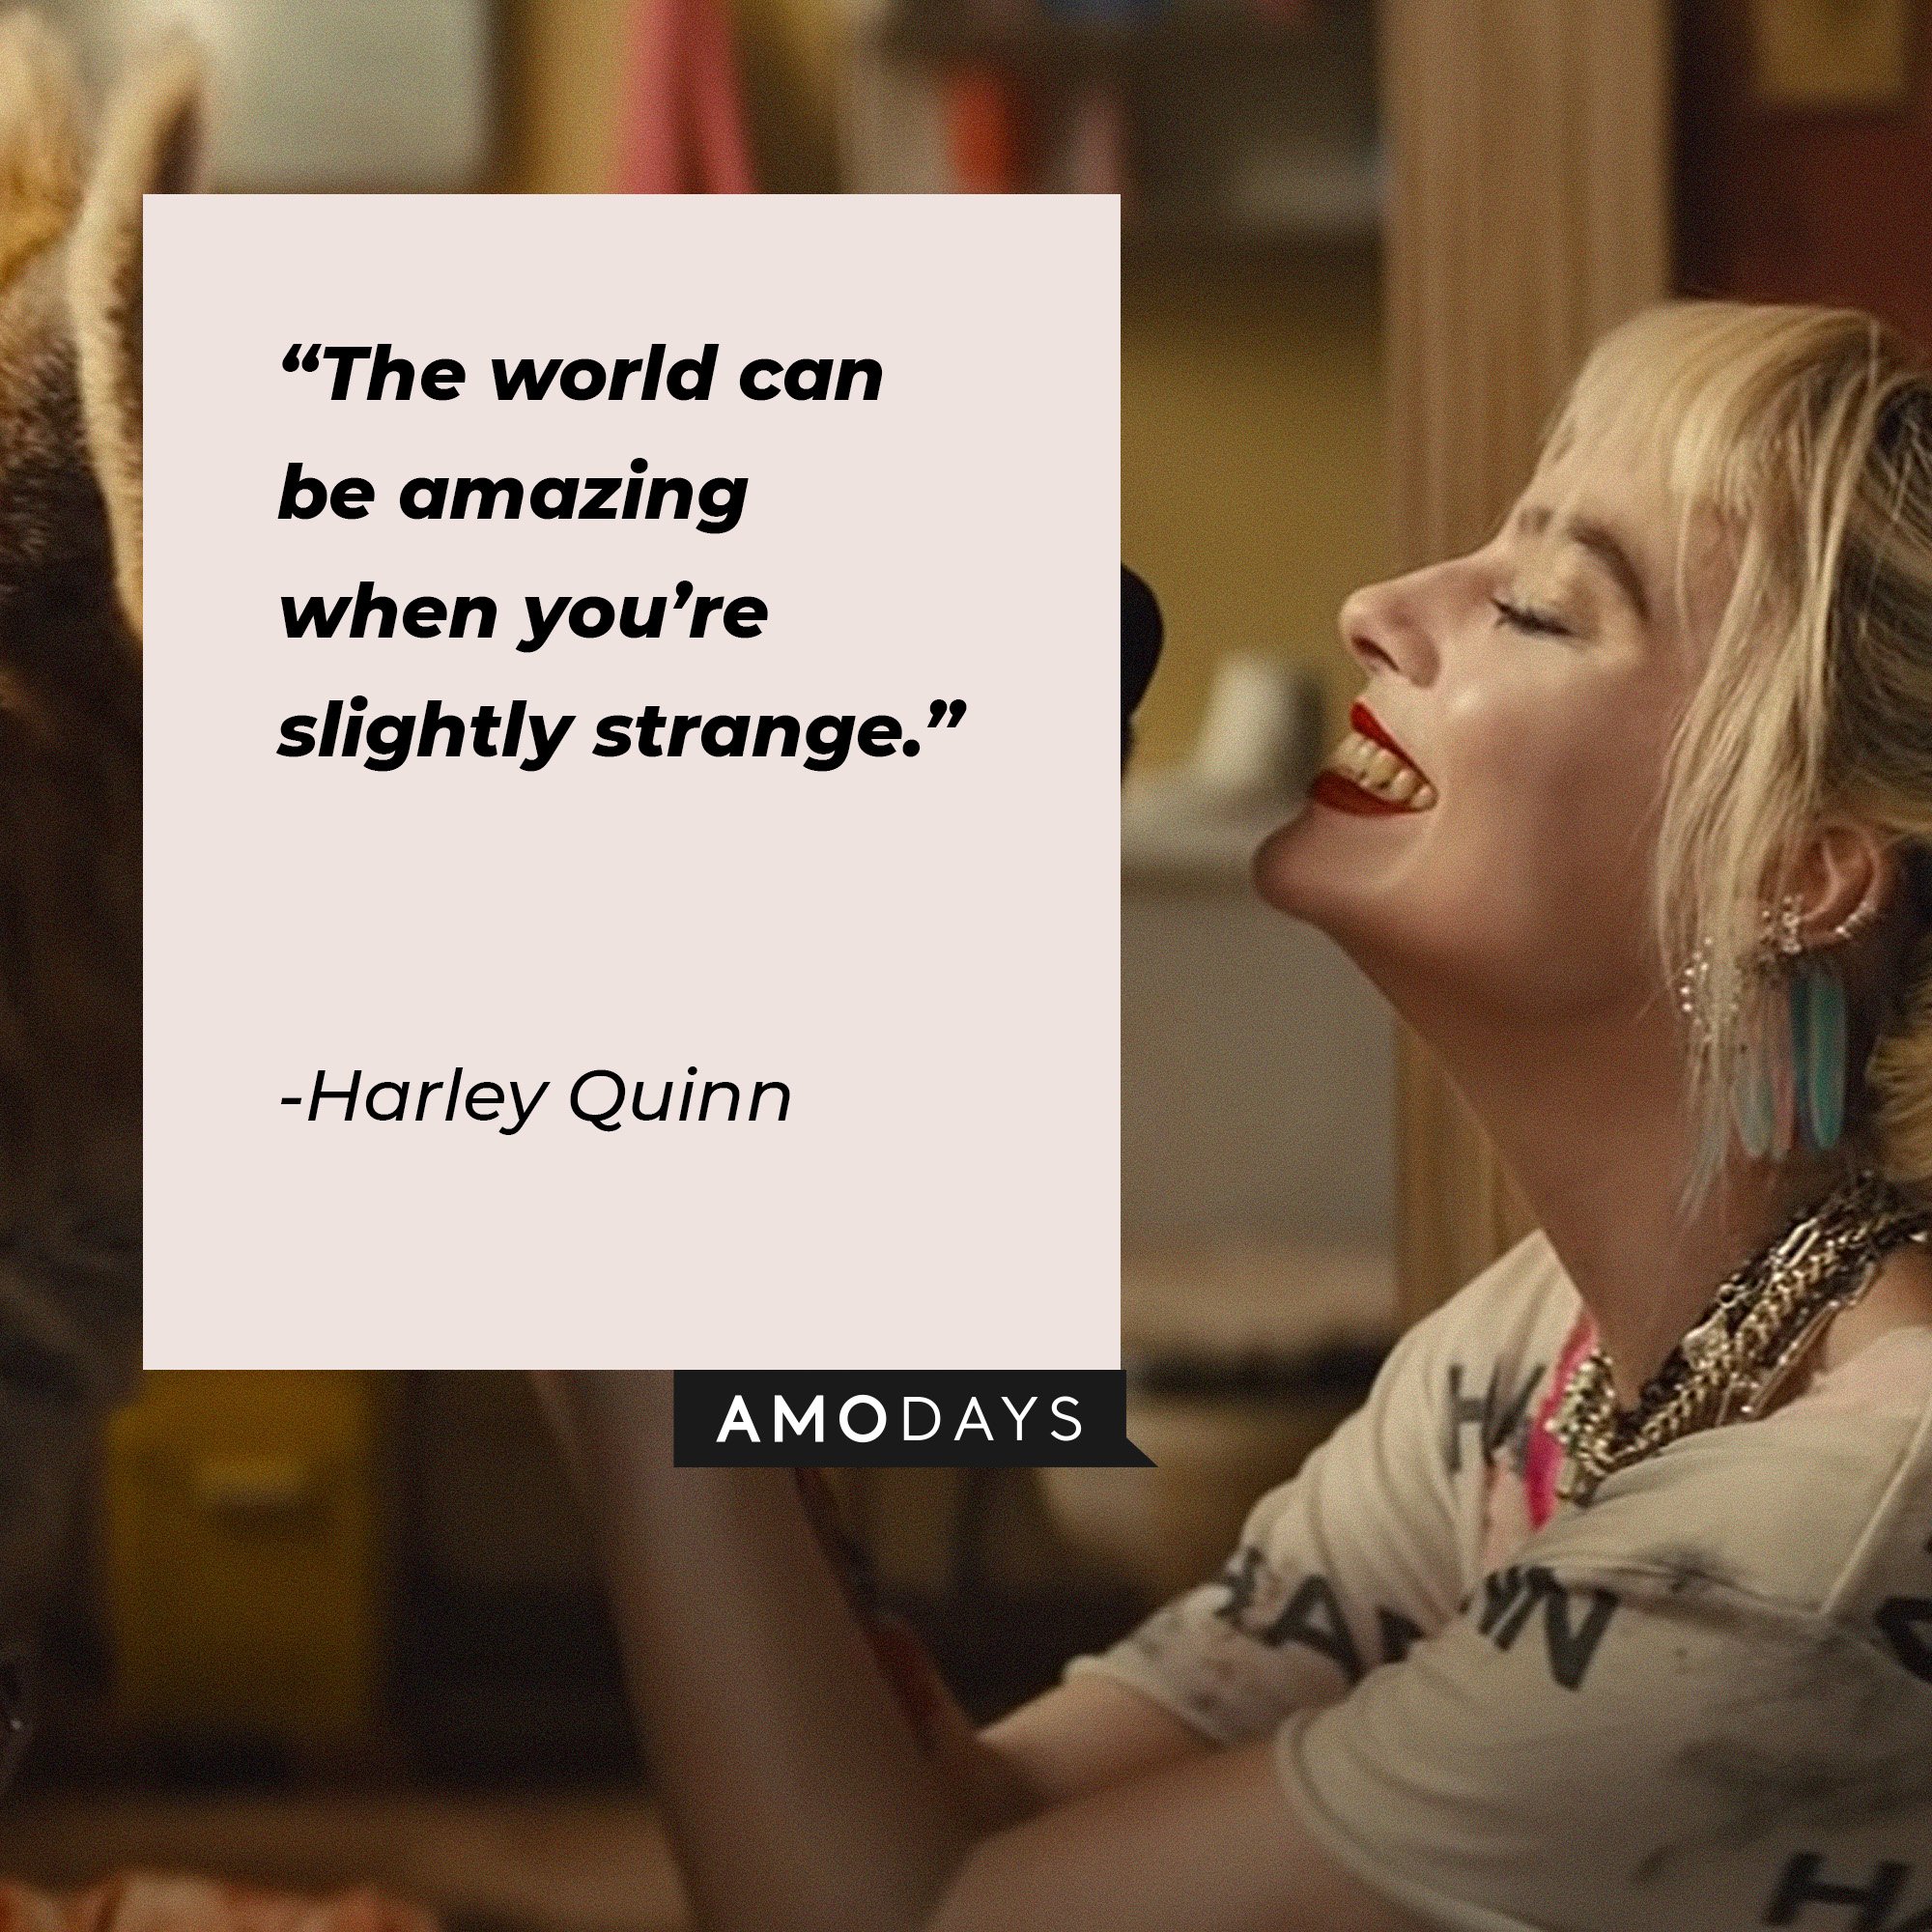 Harley Quinn’s quote: “The world can be amazing when you’re slightly strange.” | Source: Image: AmoDays